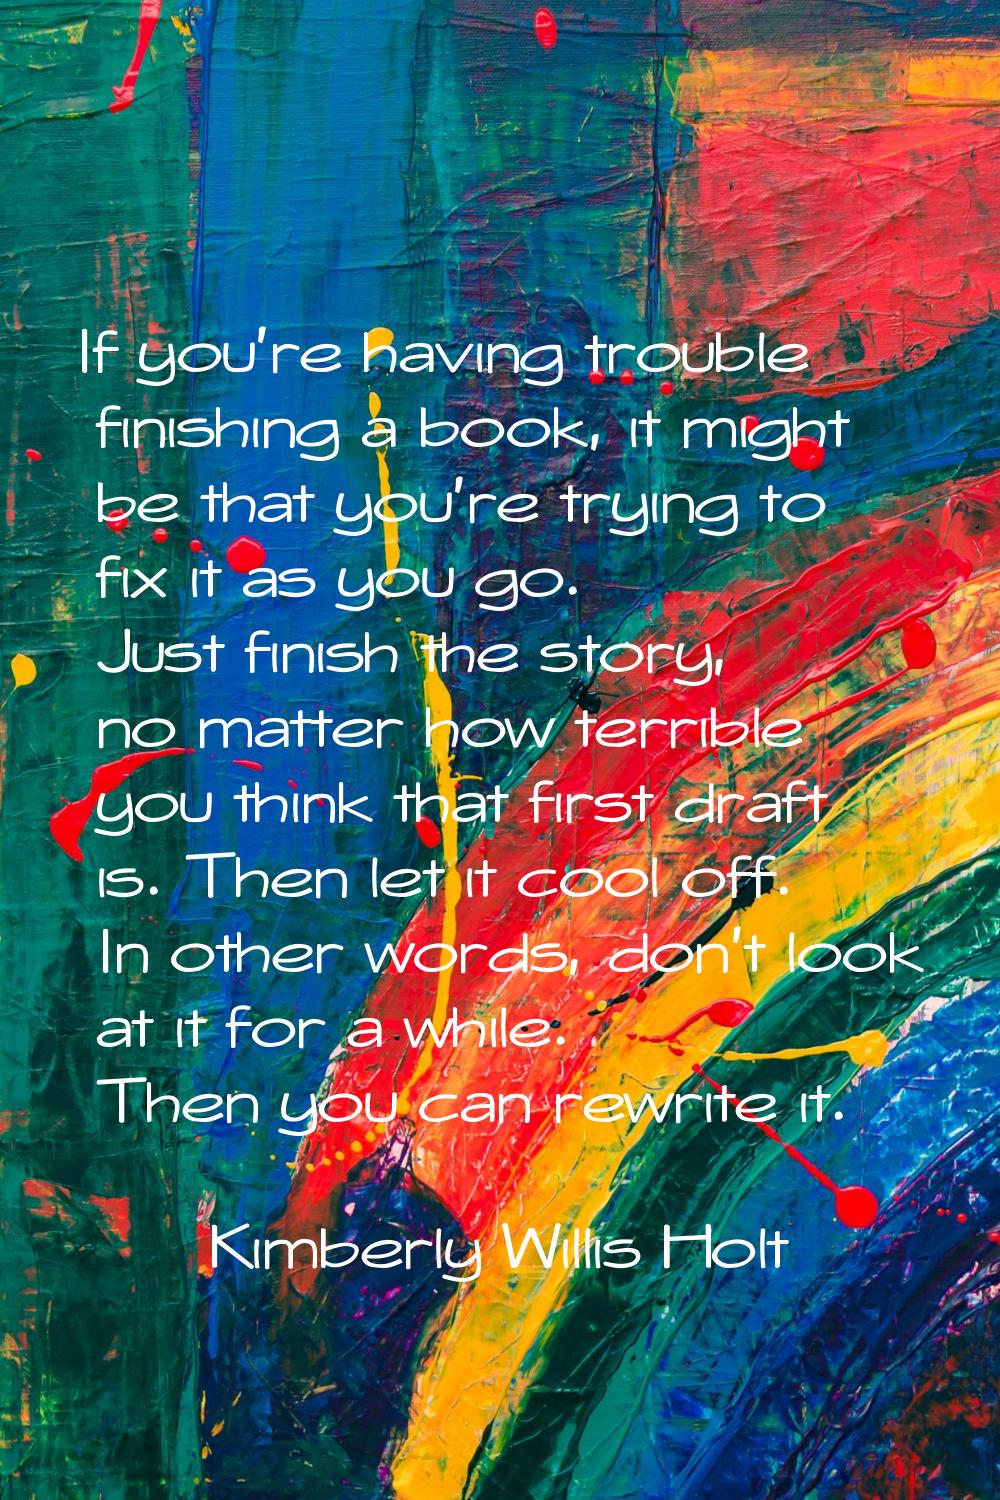 If you're having trouble finishing a book, it might be that you're trying to fix it as you go. Just